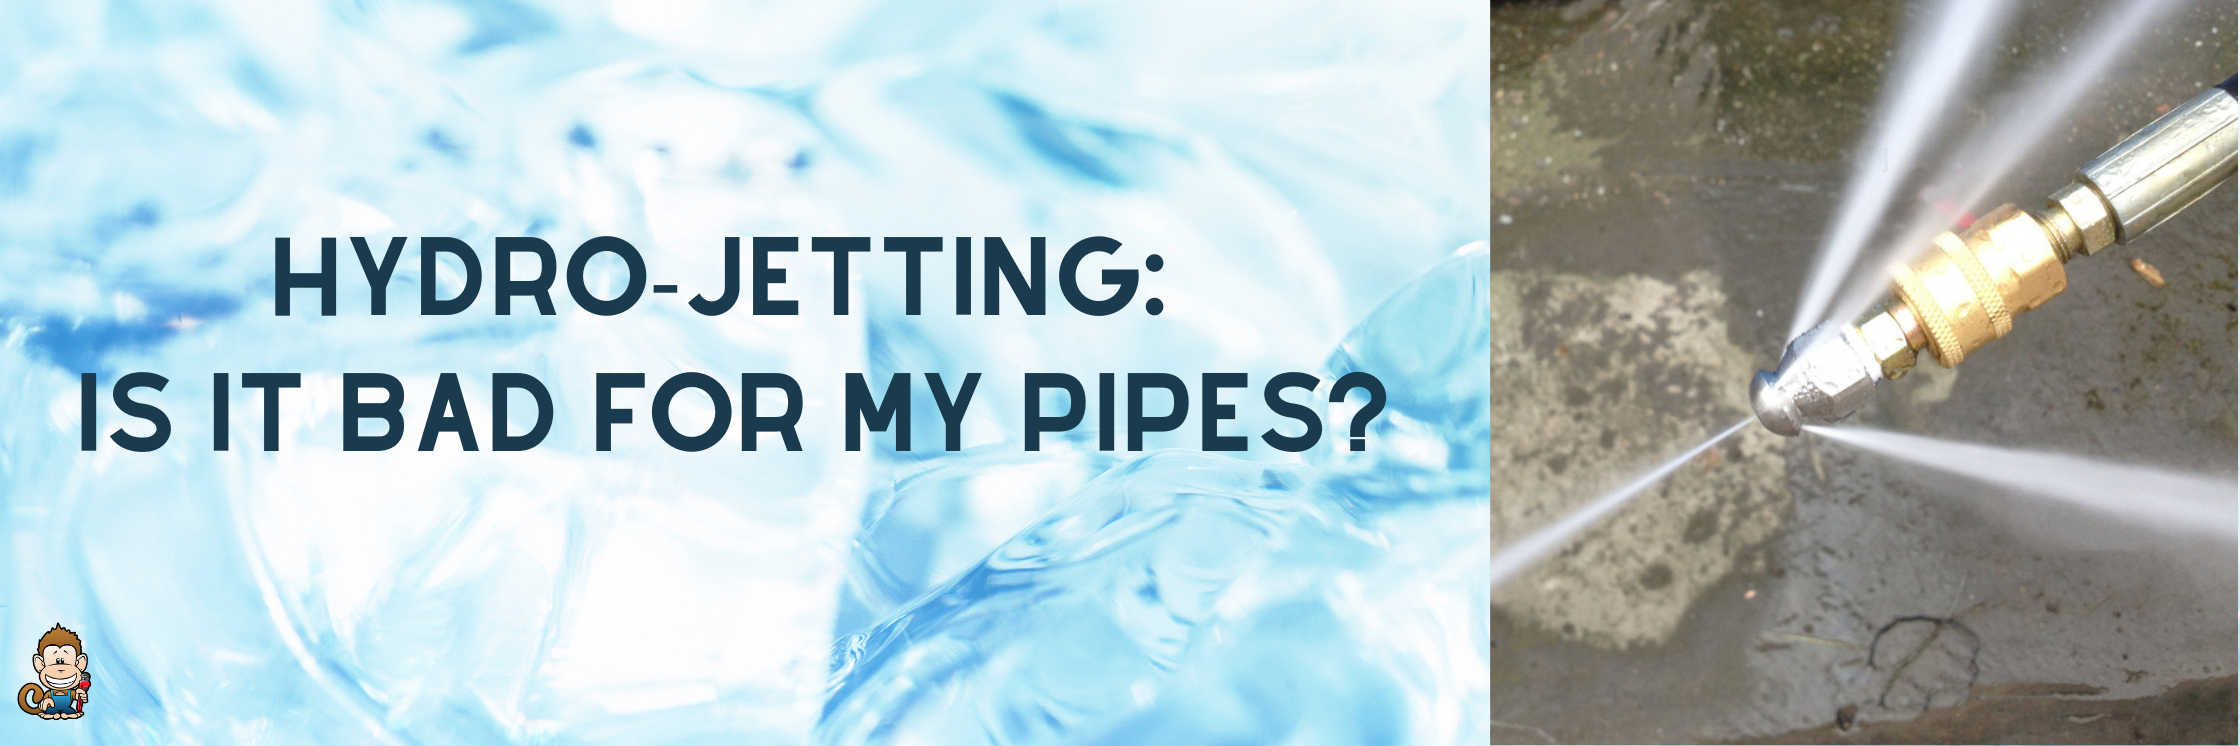 Hydro-Jetting: Is It Bad For My Pipes?